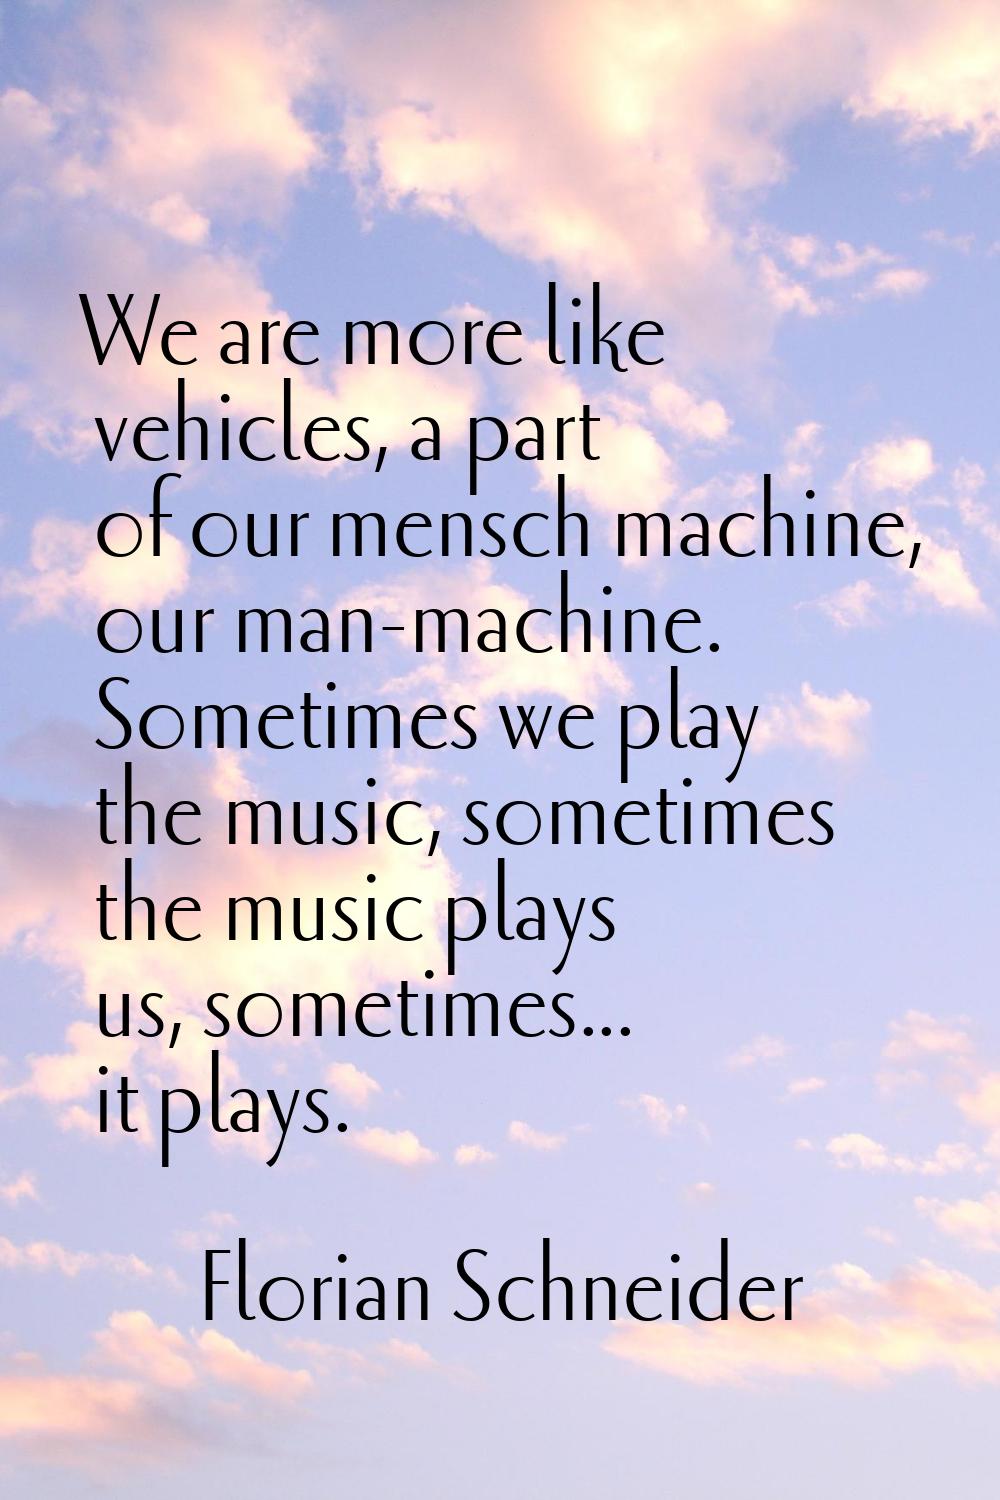 We are more like vehicles, a part of our mensch machine, our man-machine. Sometimes we play the mus